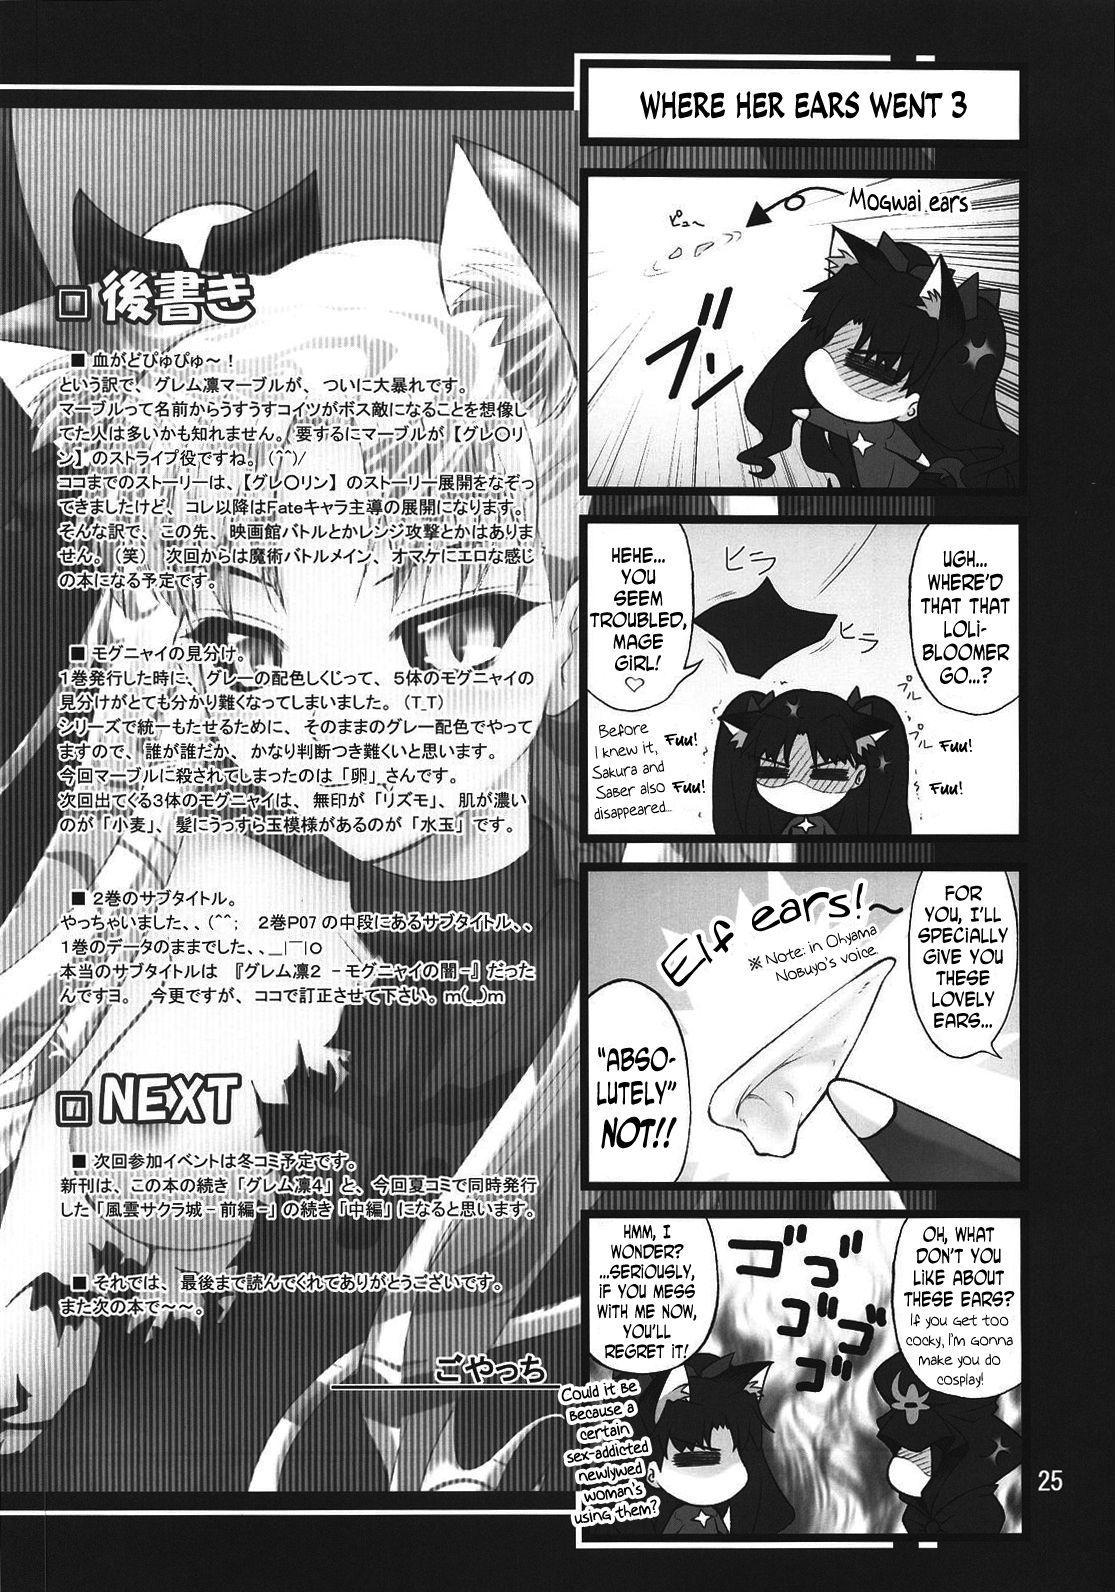 Cumswallow Grem-Rin 3 - Fate stay night Coroa - Page 24